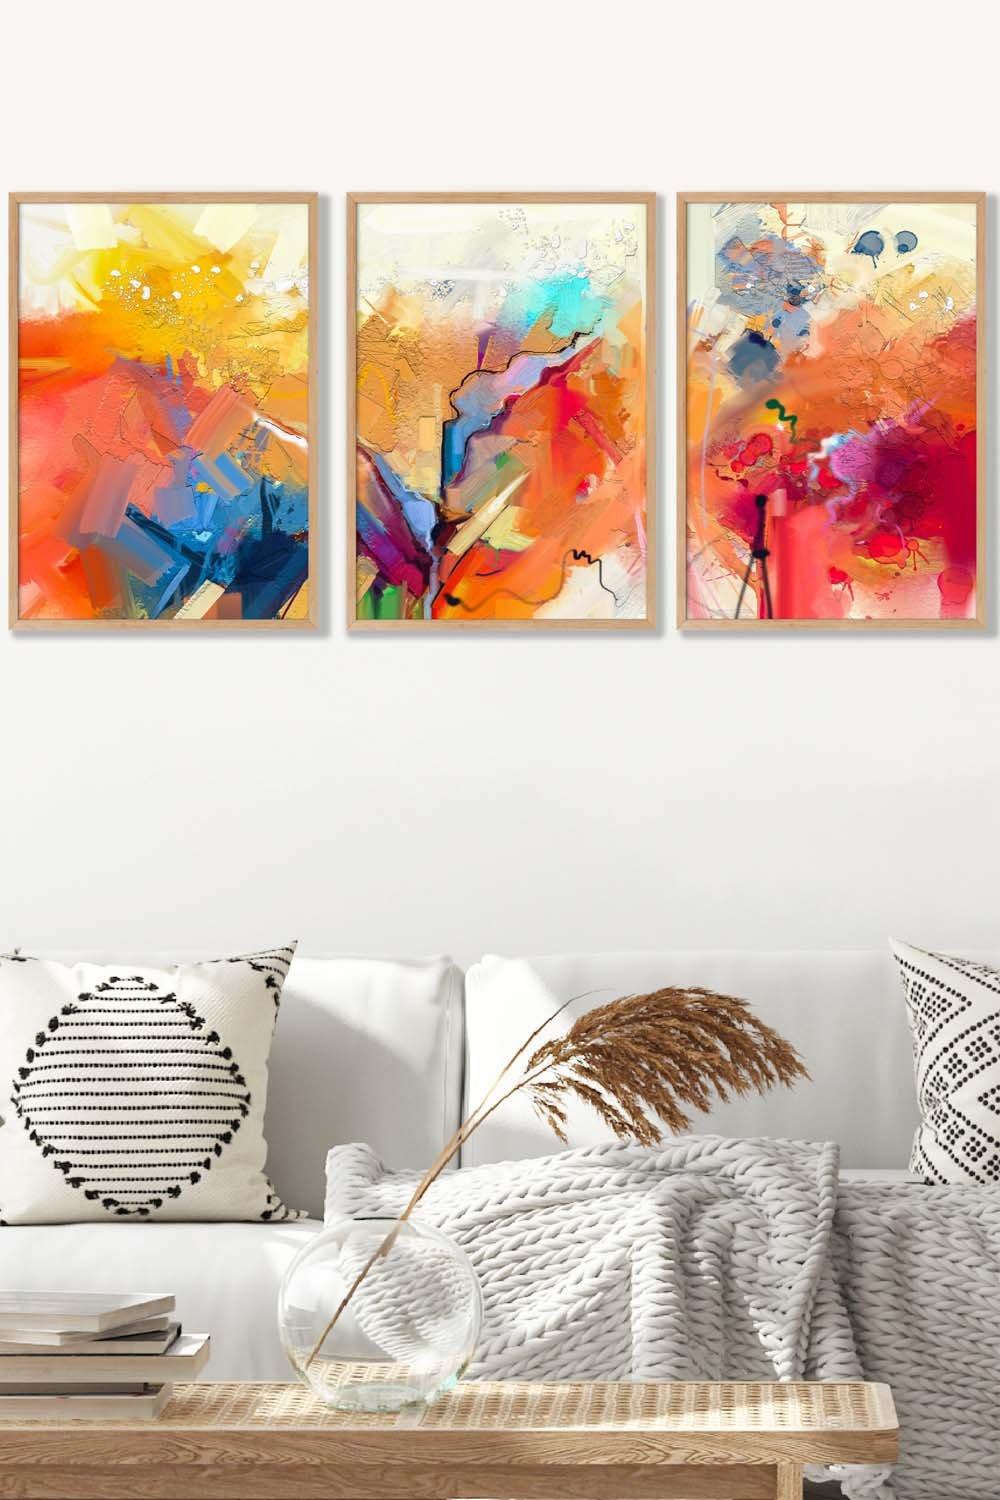 Set of 3 Oak Framed Abstract Colourful Orange Pink Red Mixed Media Fractal Wall Art